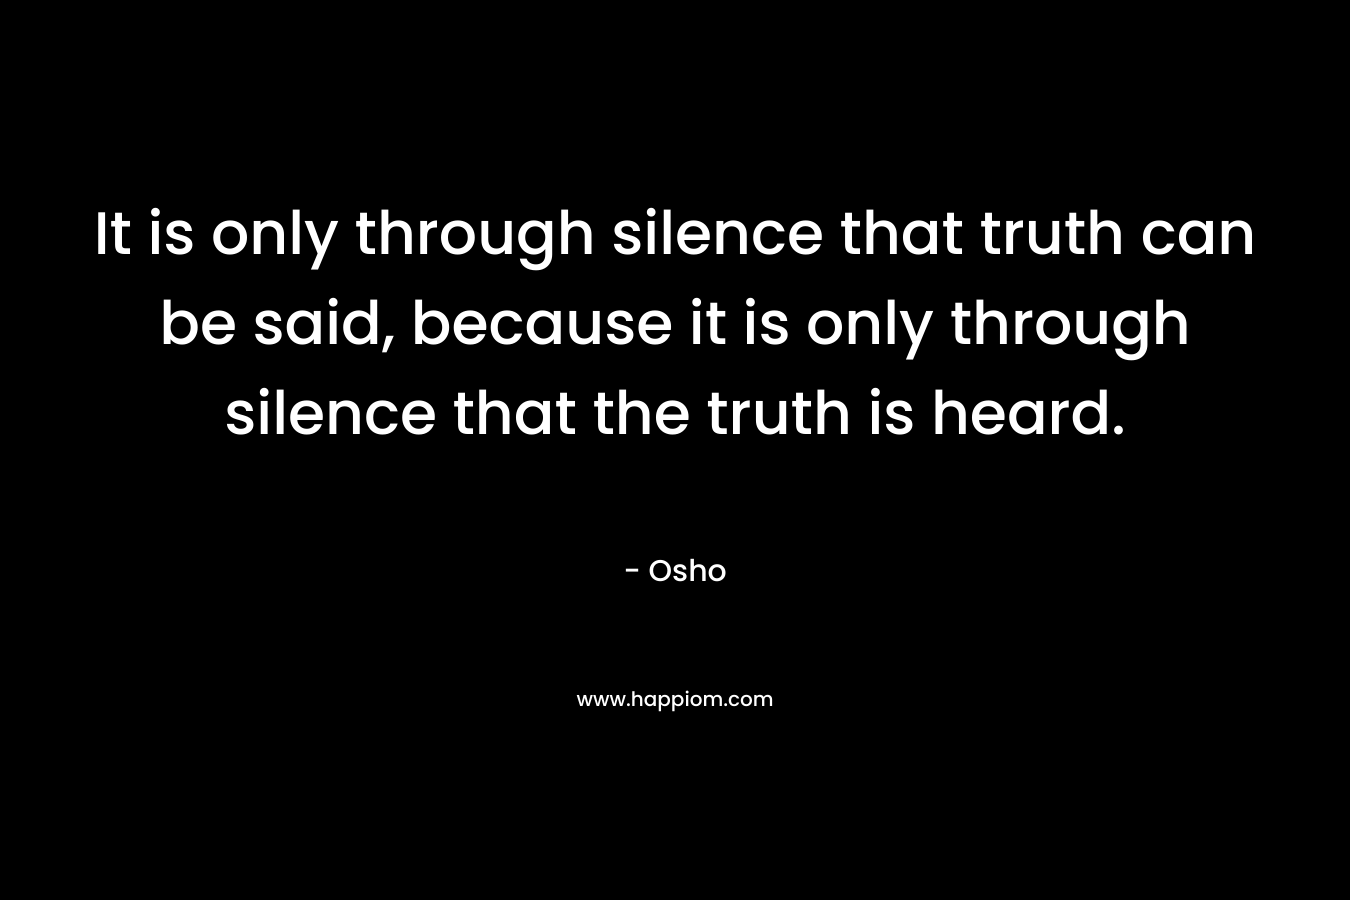 It is only through silence that truth can be said, because it is only through silence that the truth is heard. – Osho